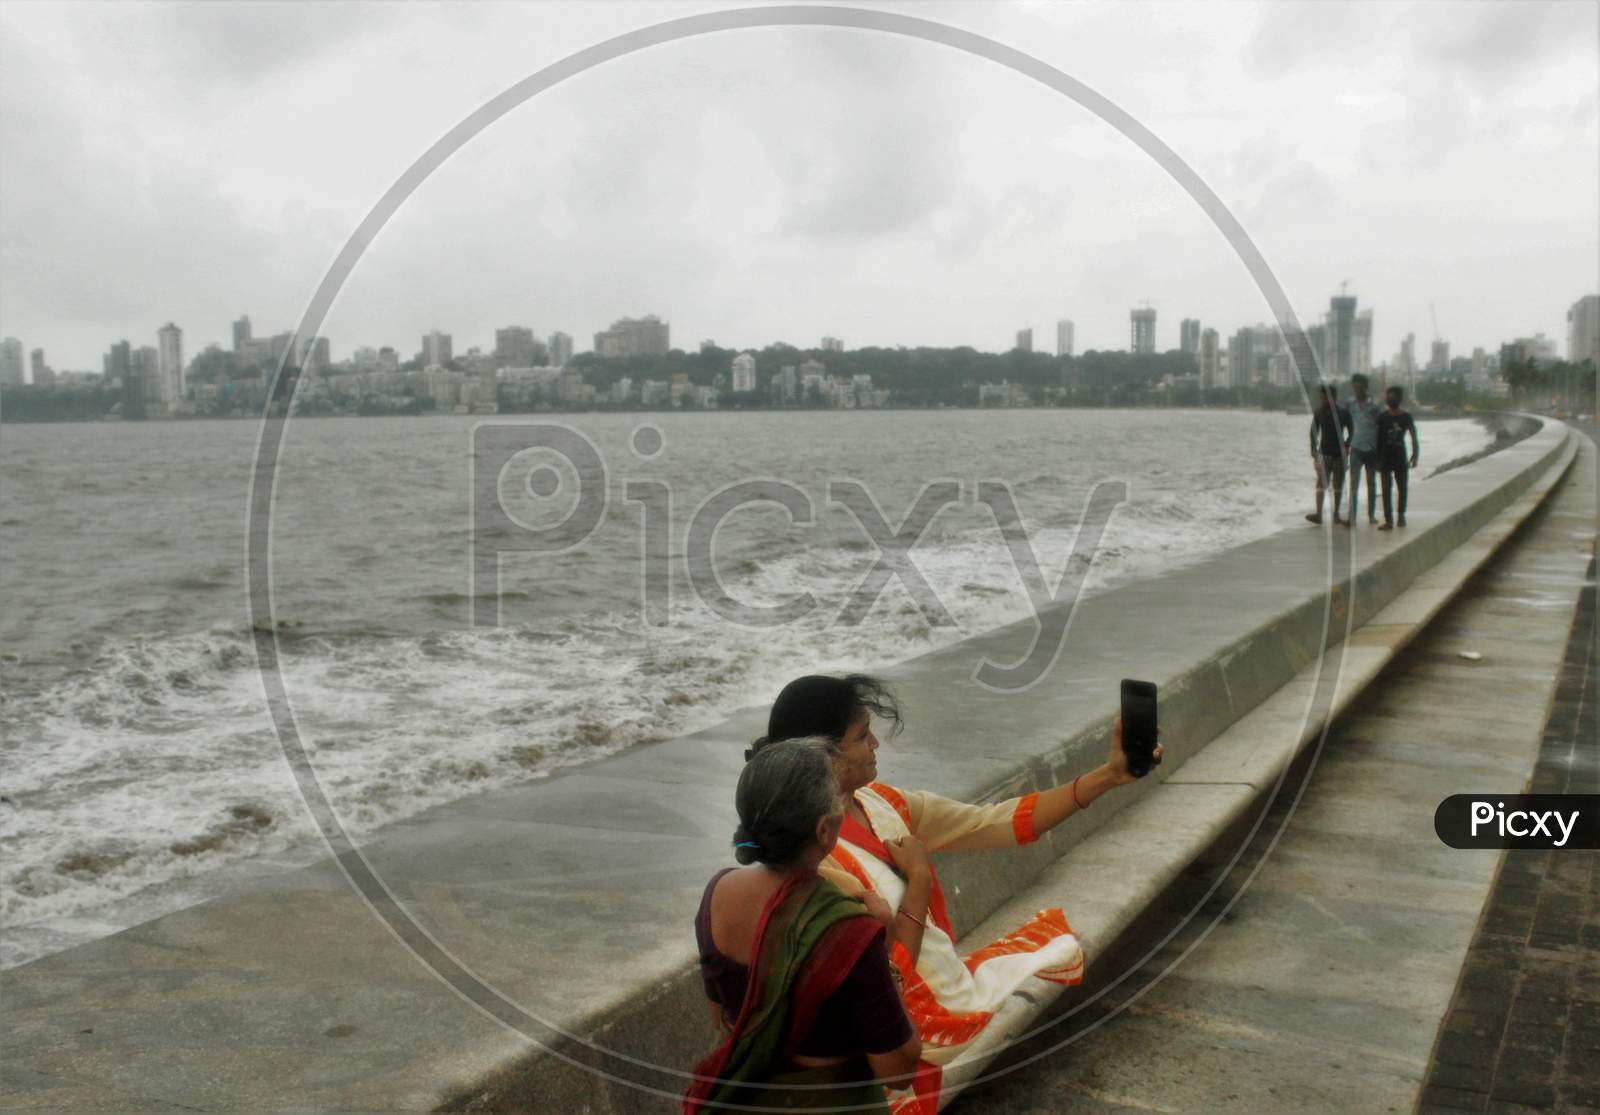 Women take a selfie on the promenade along the Marine Drive on an overcast day,  in Mumbai on June 18, 2020.